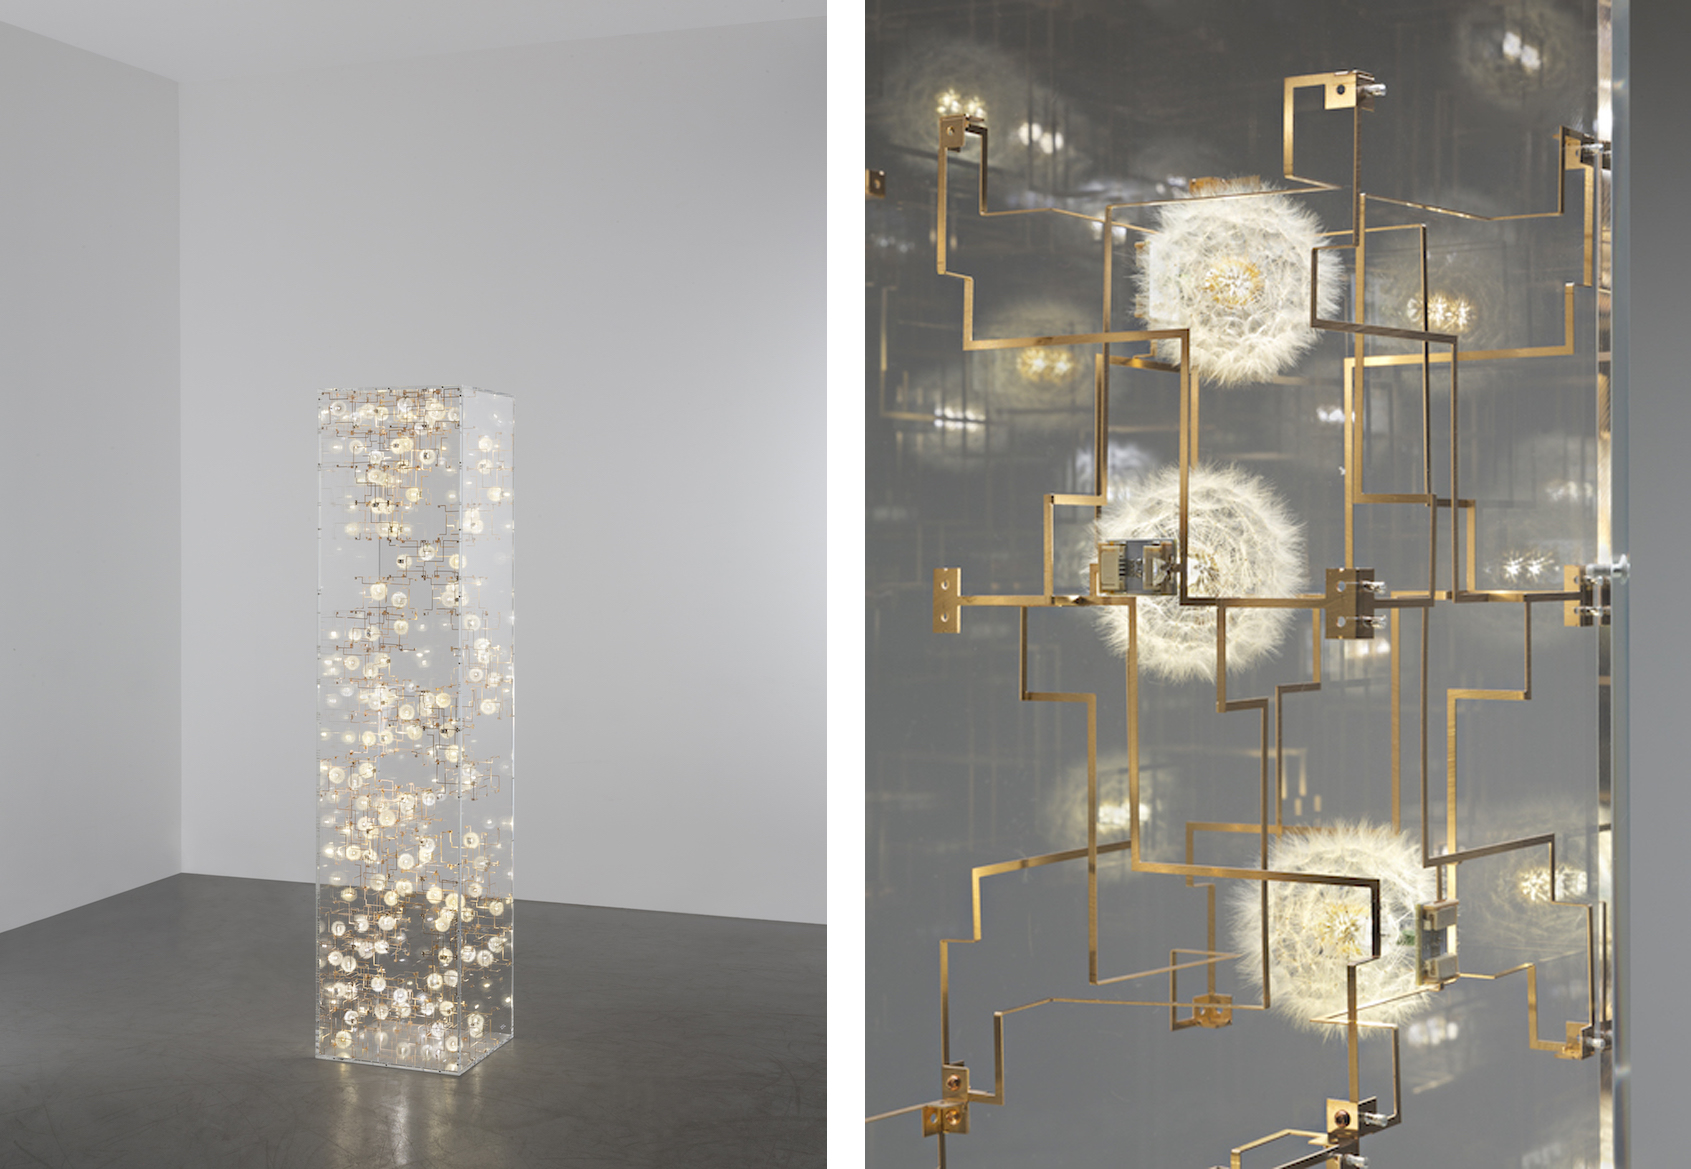 Lonneke Gordijn and Ralph Nauta, Studio Drift, Fragile Future 3.13 (detail on right), 2013, Los Angeles County Museum of Art, gift of the 2019 Decorative Arts and Design Acquisitions Committee (DA²), photo courtesy of Carpenter’s Workshop Gallery